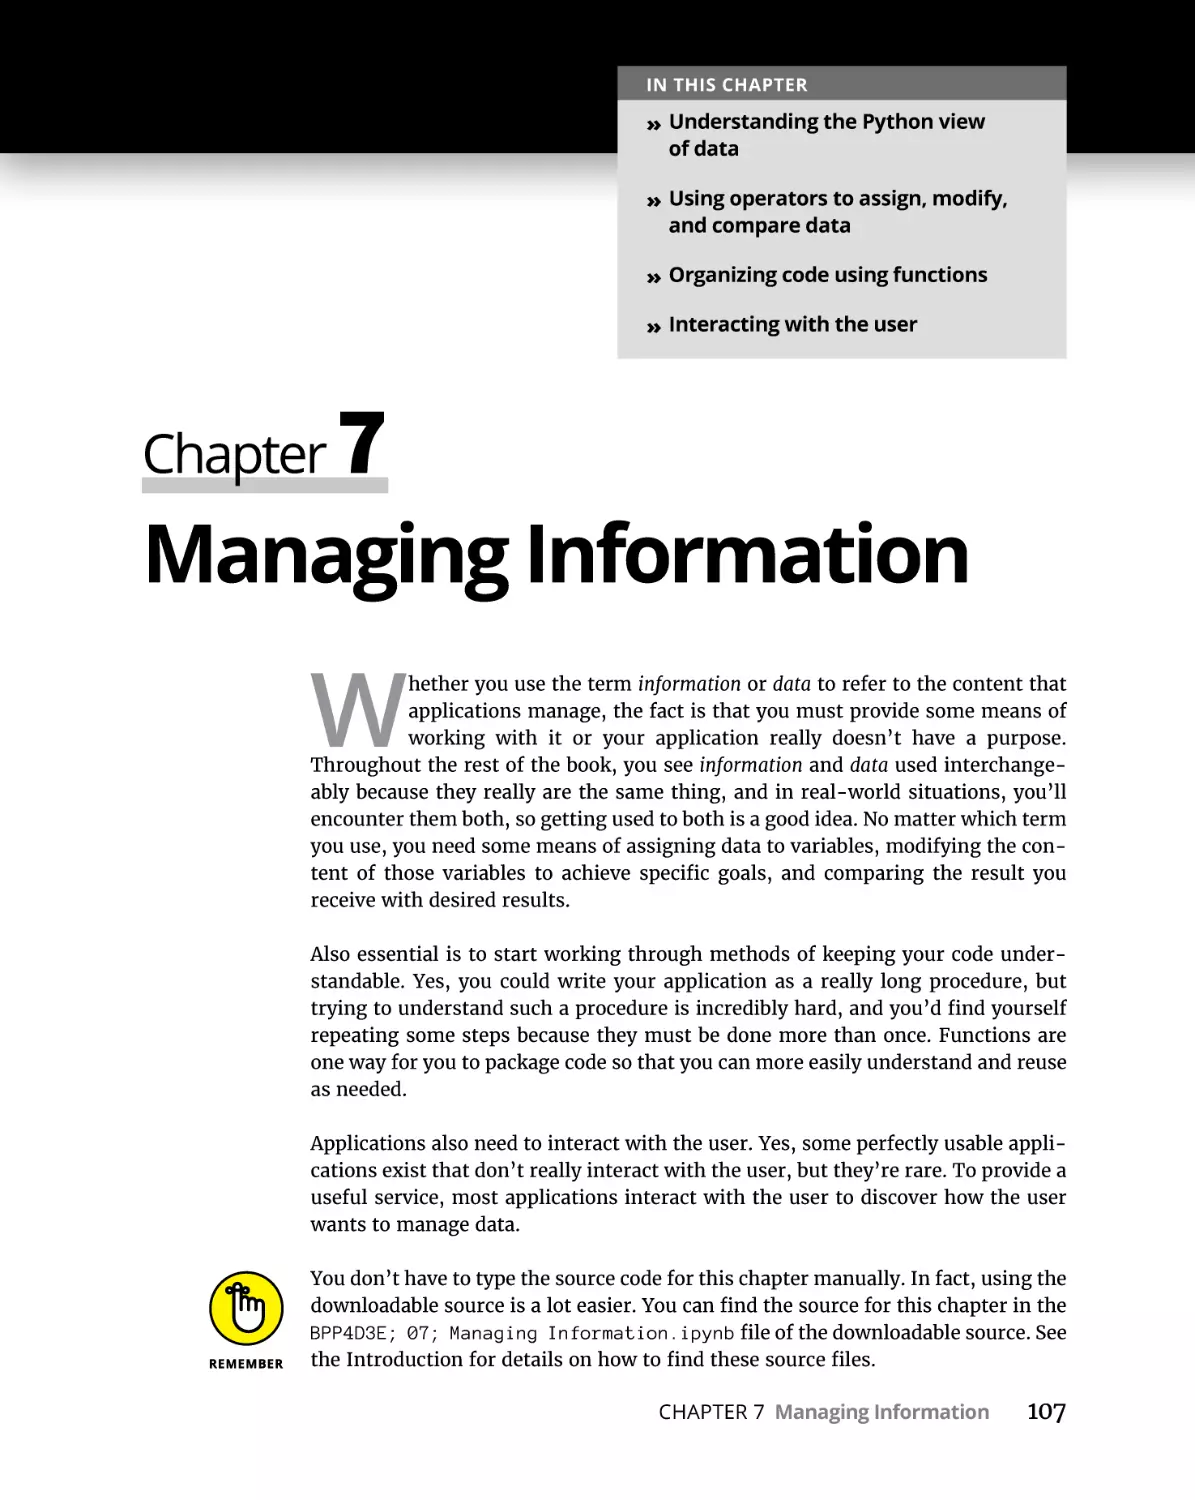 Chapter 7 Managing Information